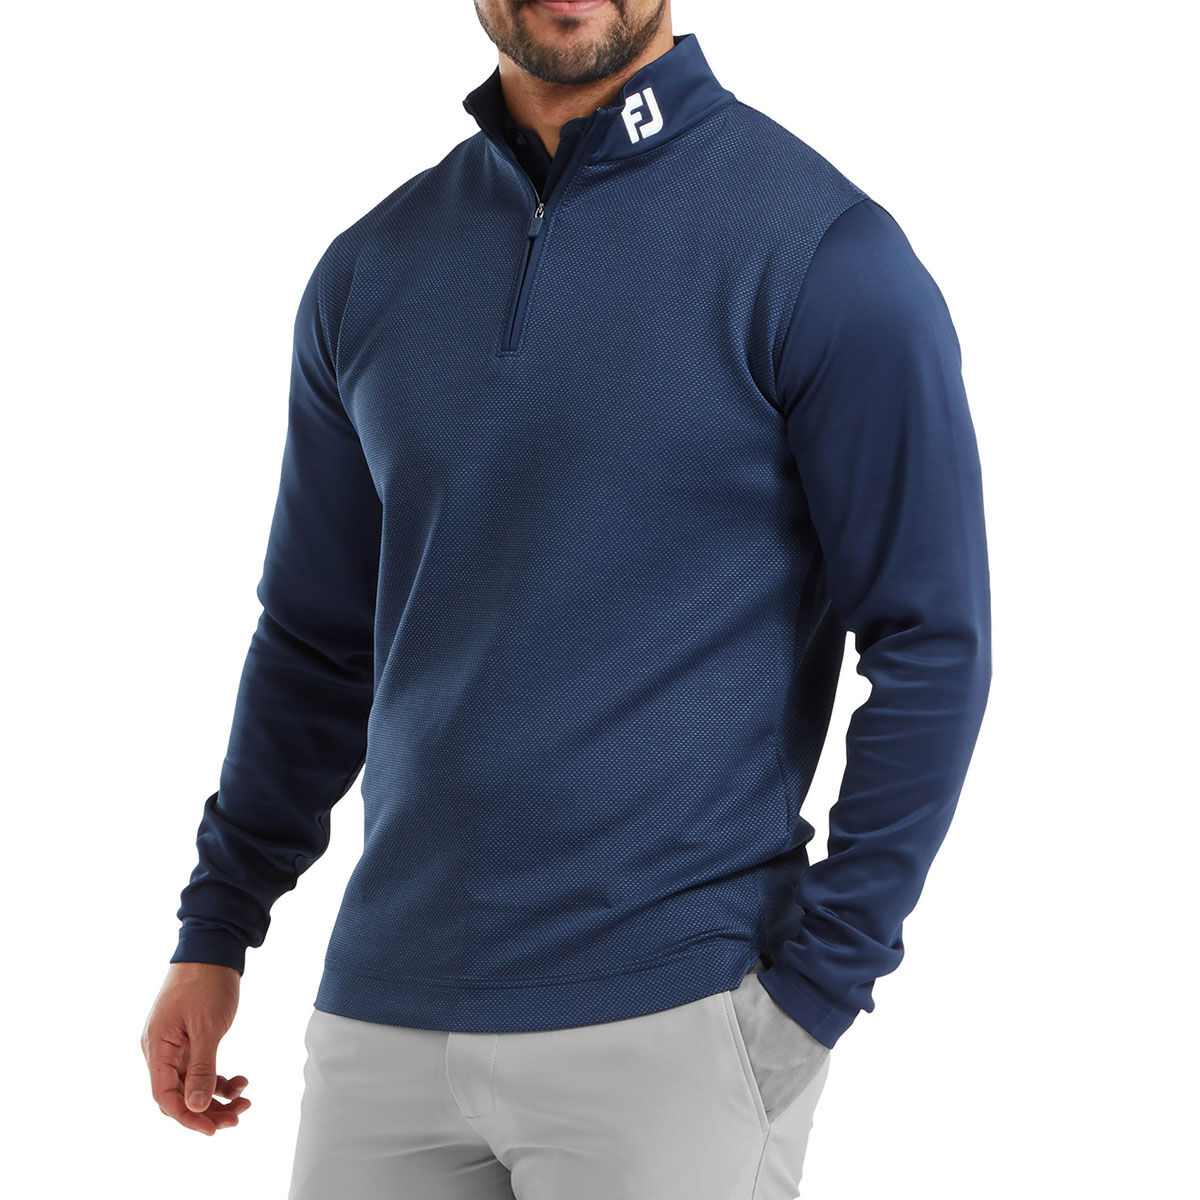 FootJoy Men's Spacer Knit Tonal Chill-Out Half Zip Golf Mid Layer, Mens, Navy blue, Small | American Golf von FootJoy